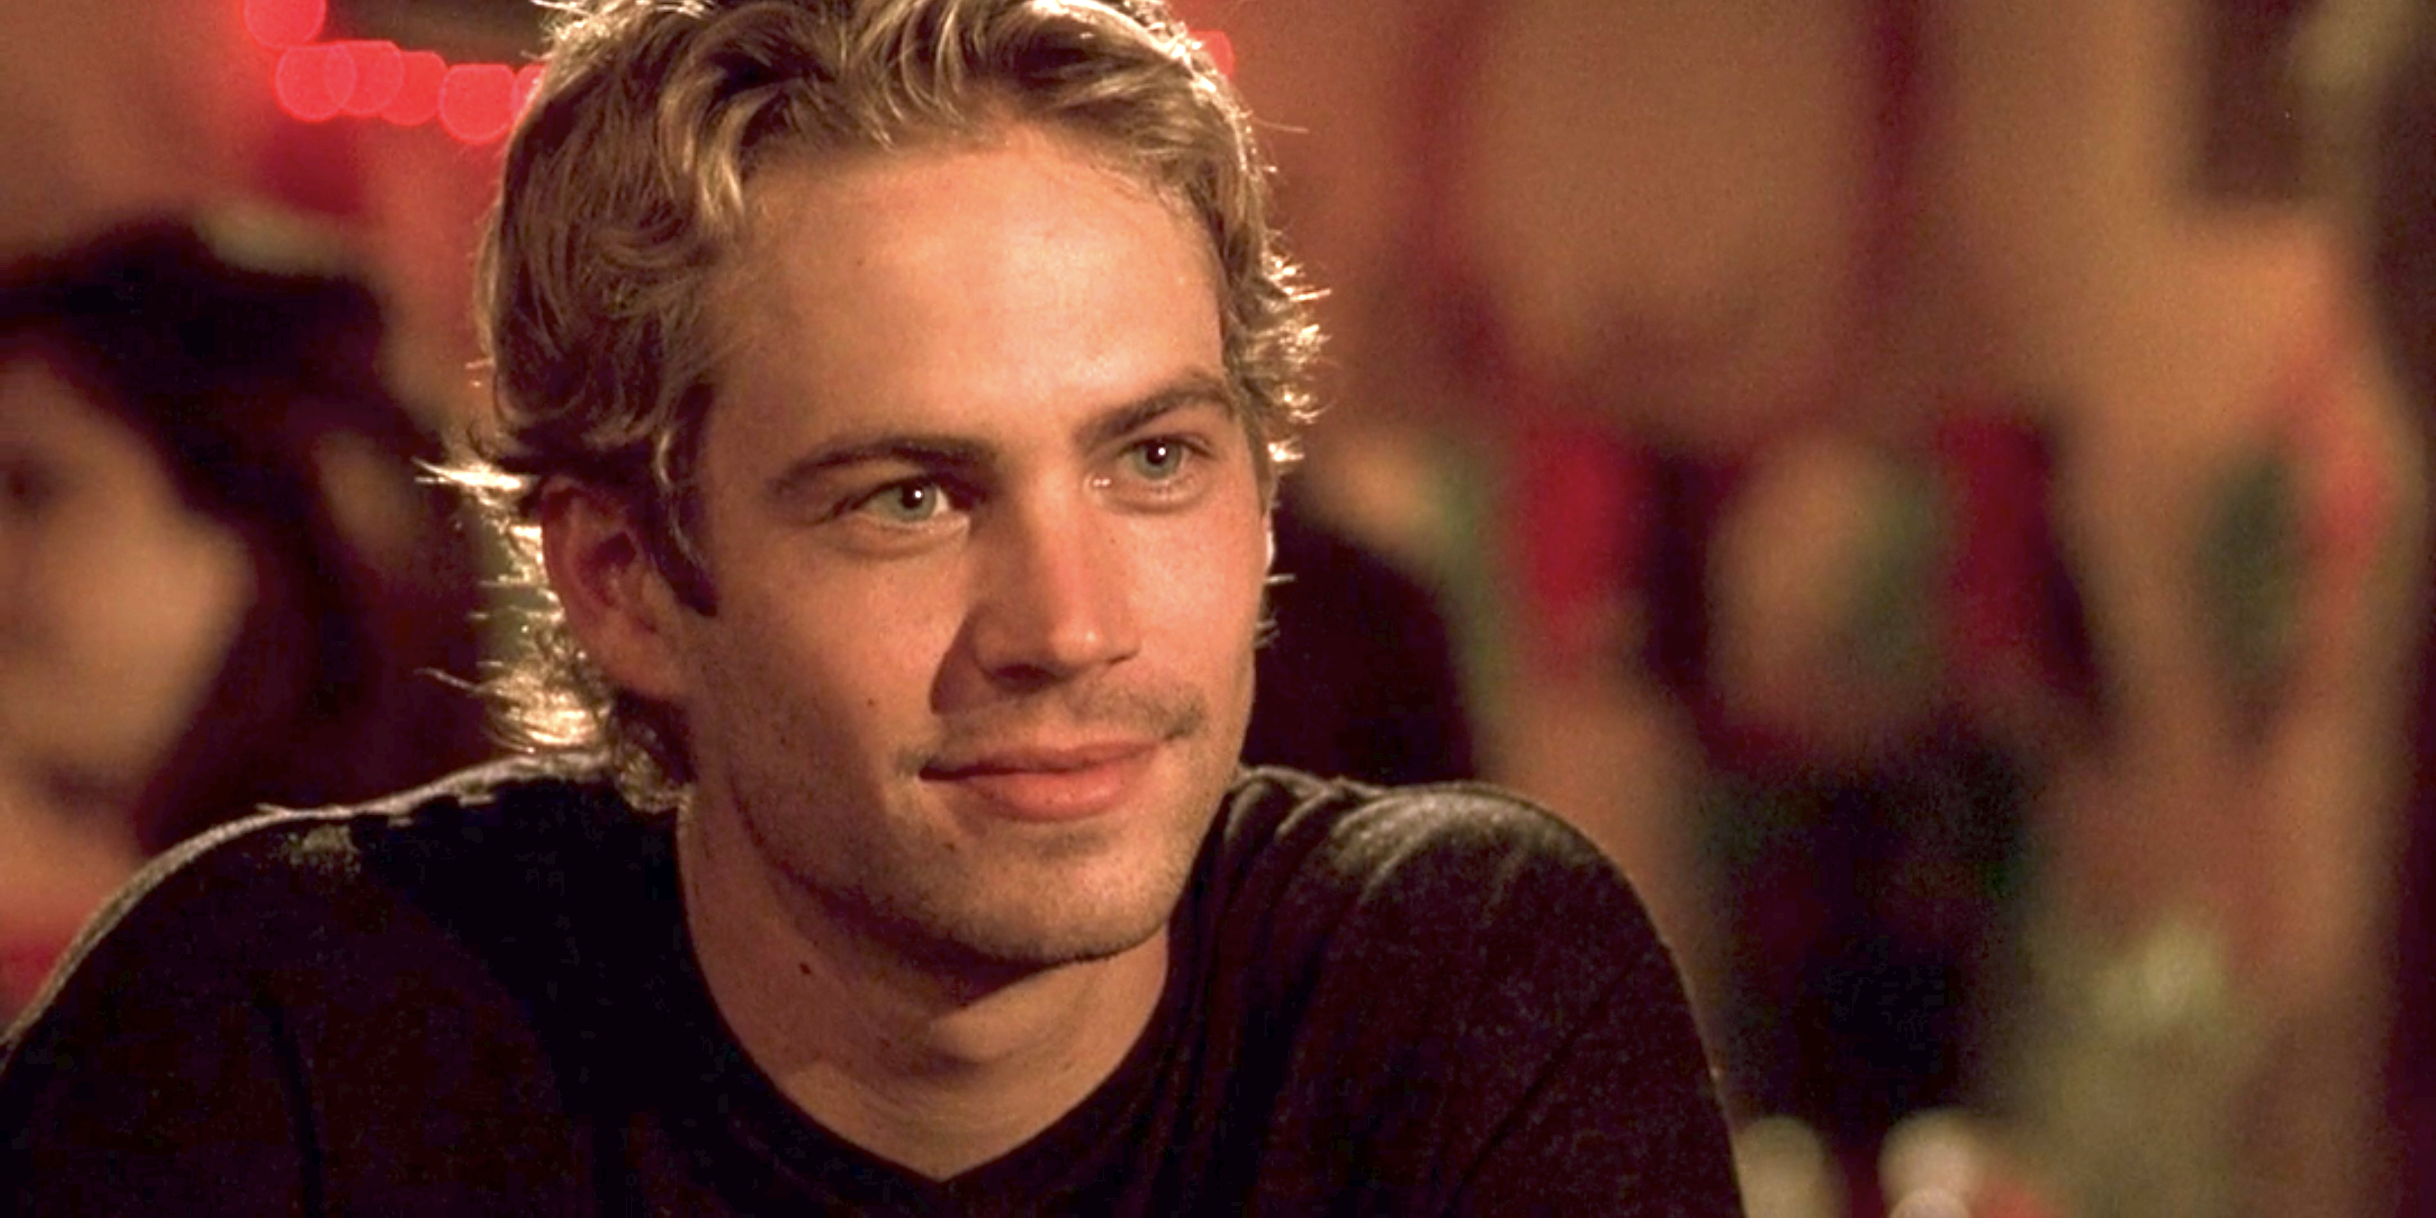 Paul Walker as Brian O'Conner in "The Fast and the Furious."